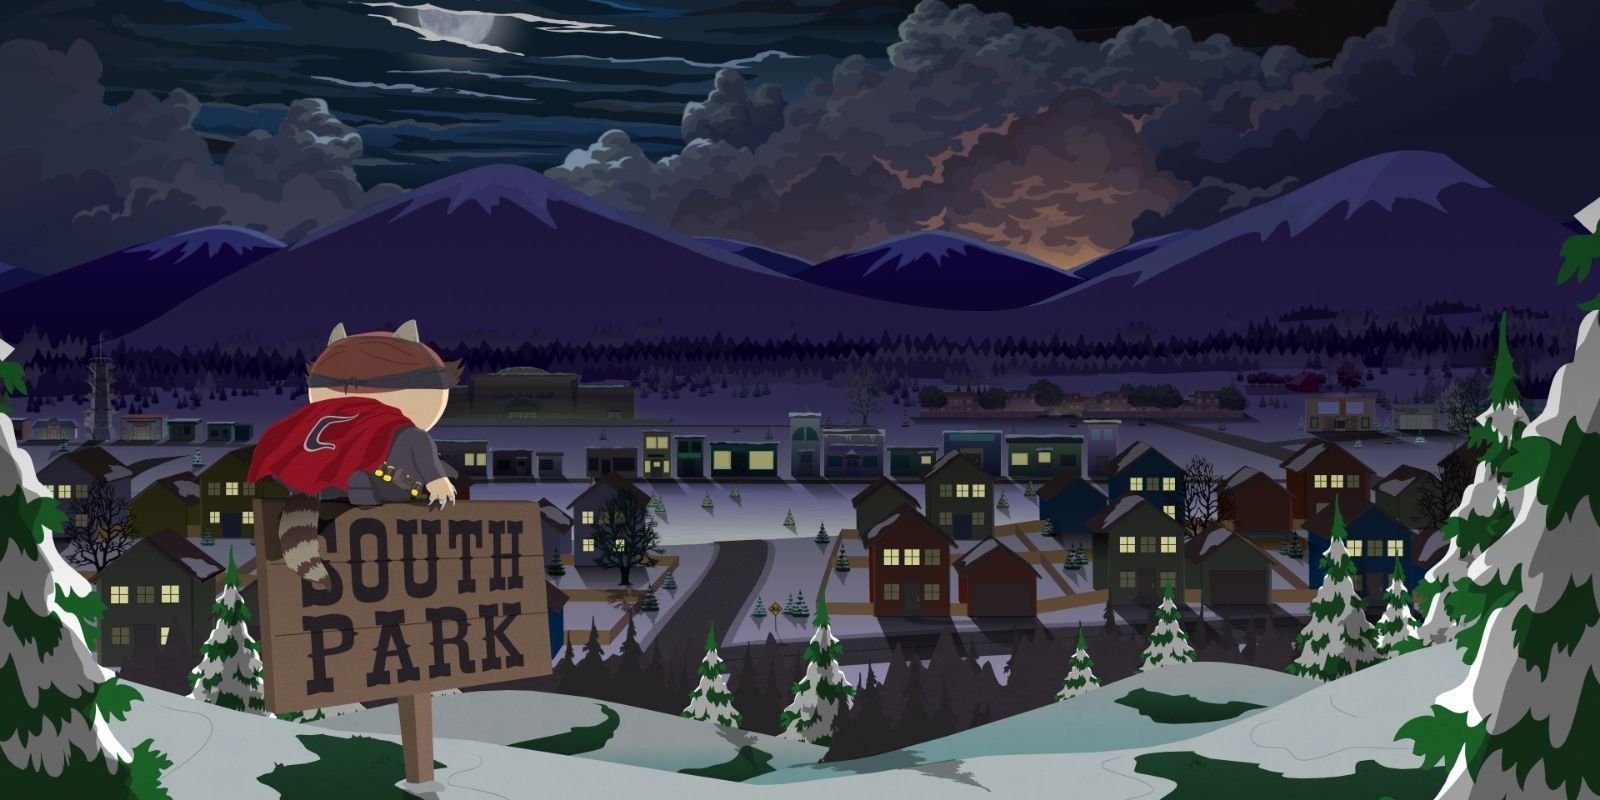 South Park Multiplayer Game Seemingly Confirmed by New Job Listing